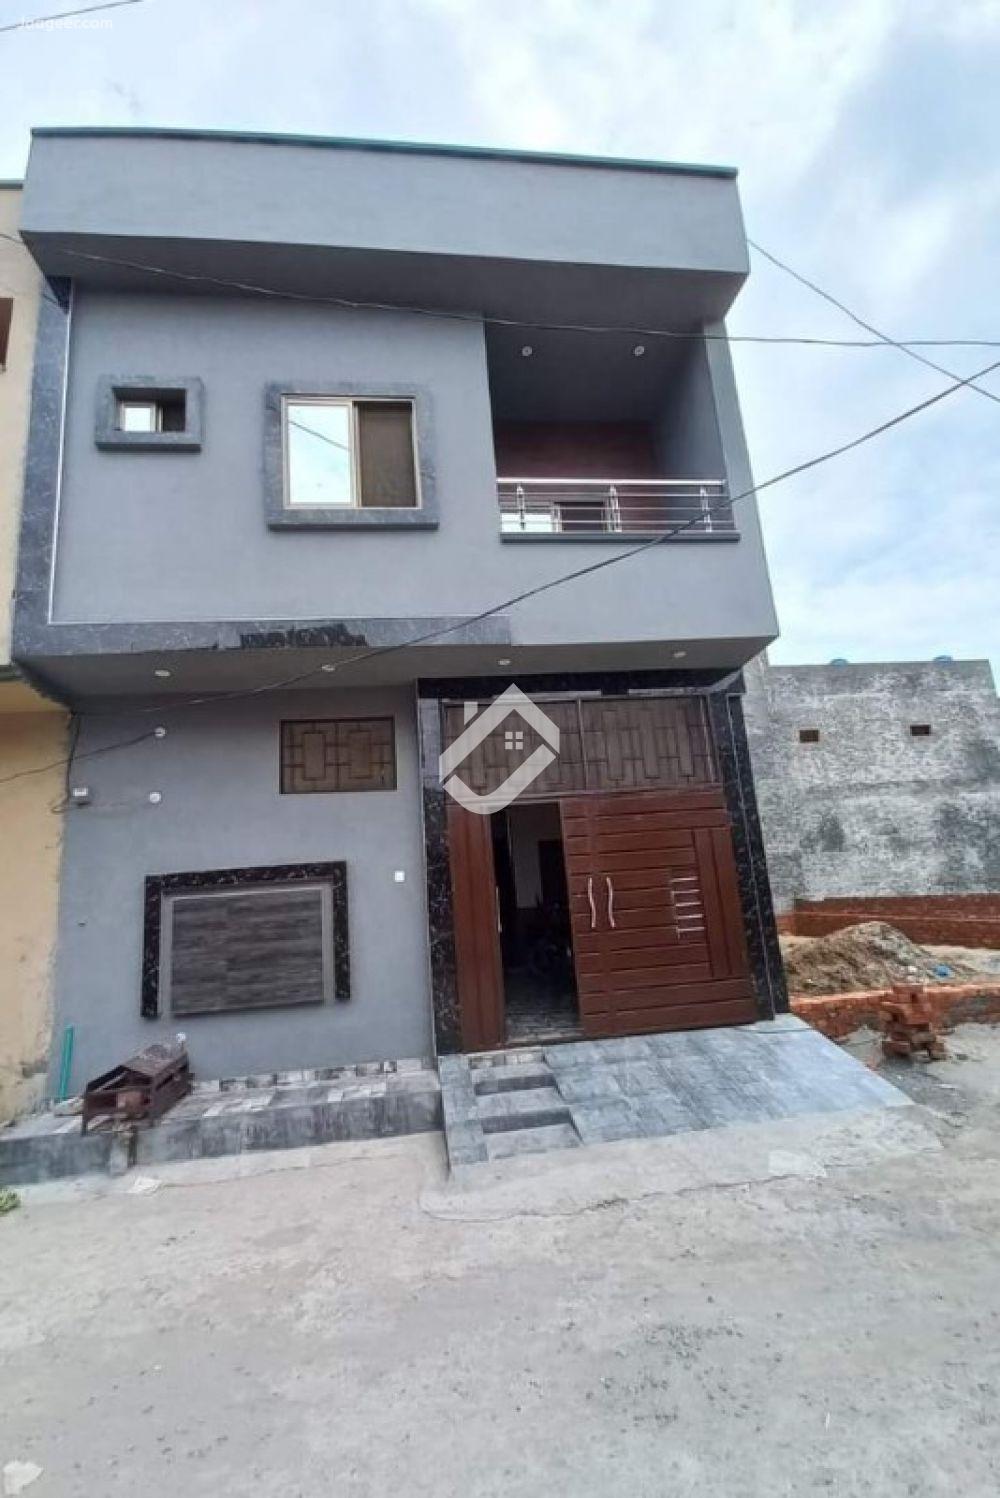 View  4 Marla Double Storey House For Sale In Lahore Medical Housing Society in Lahore Medical Housing Society, Lahore